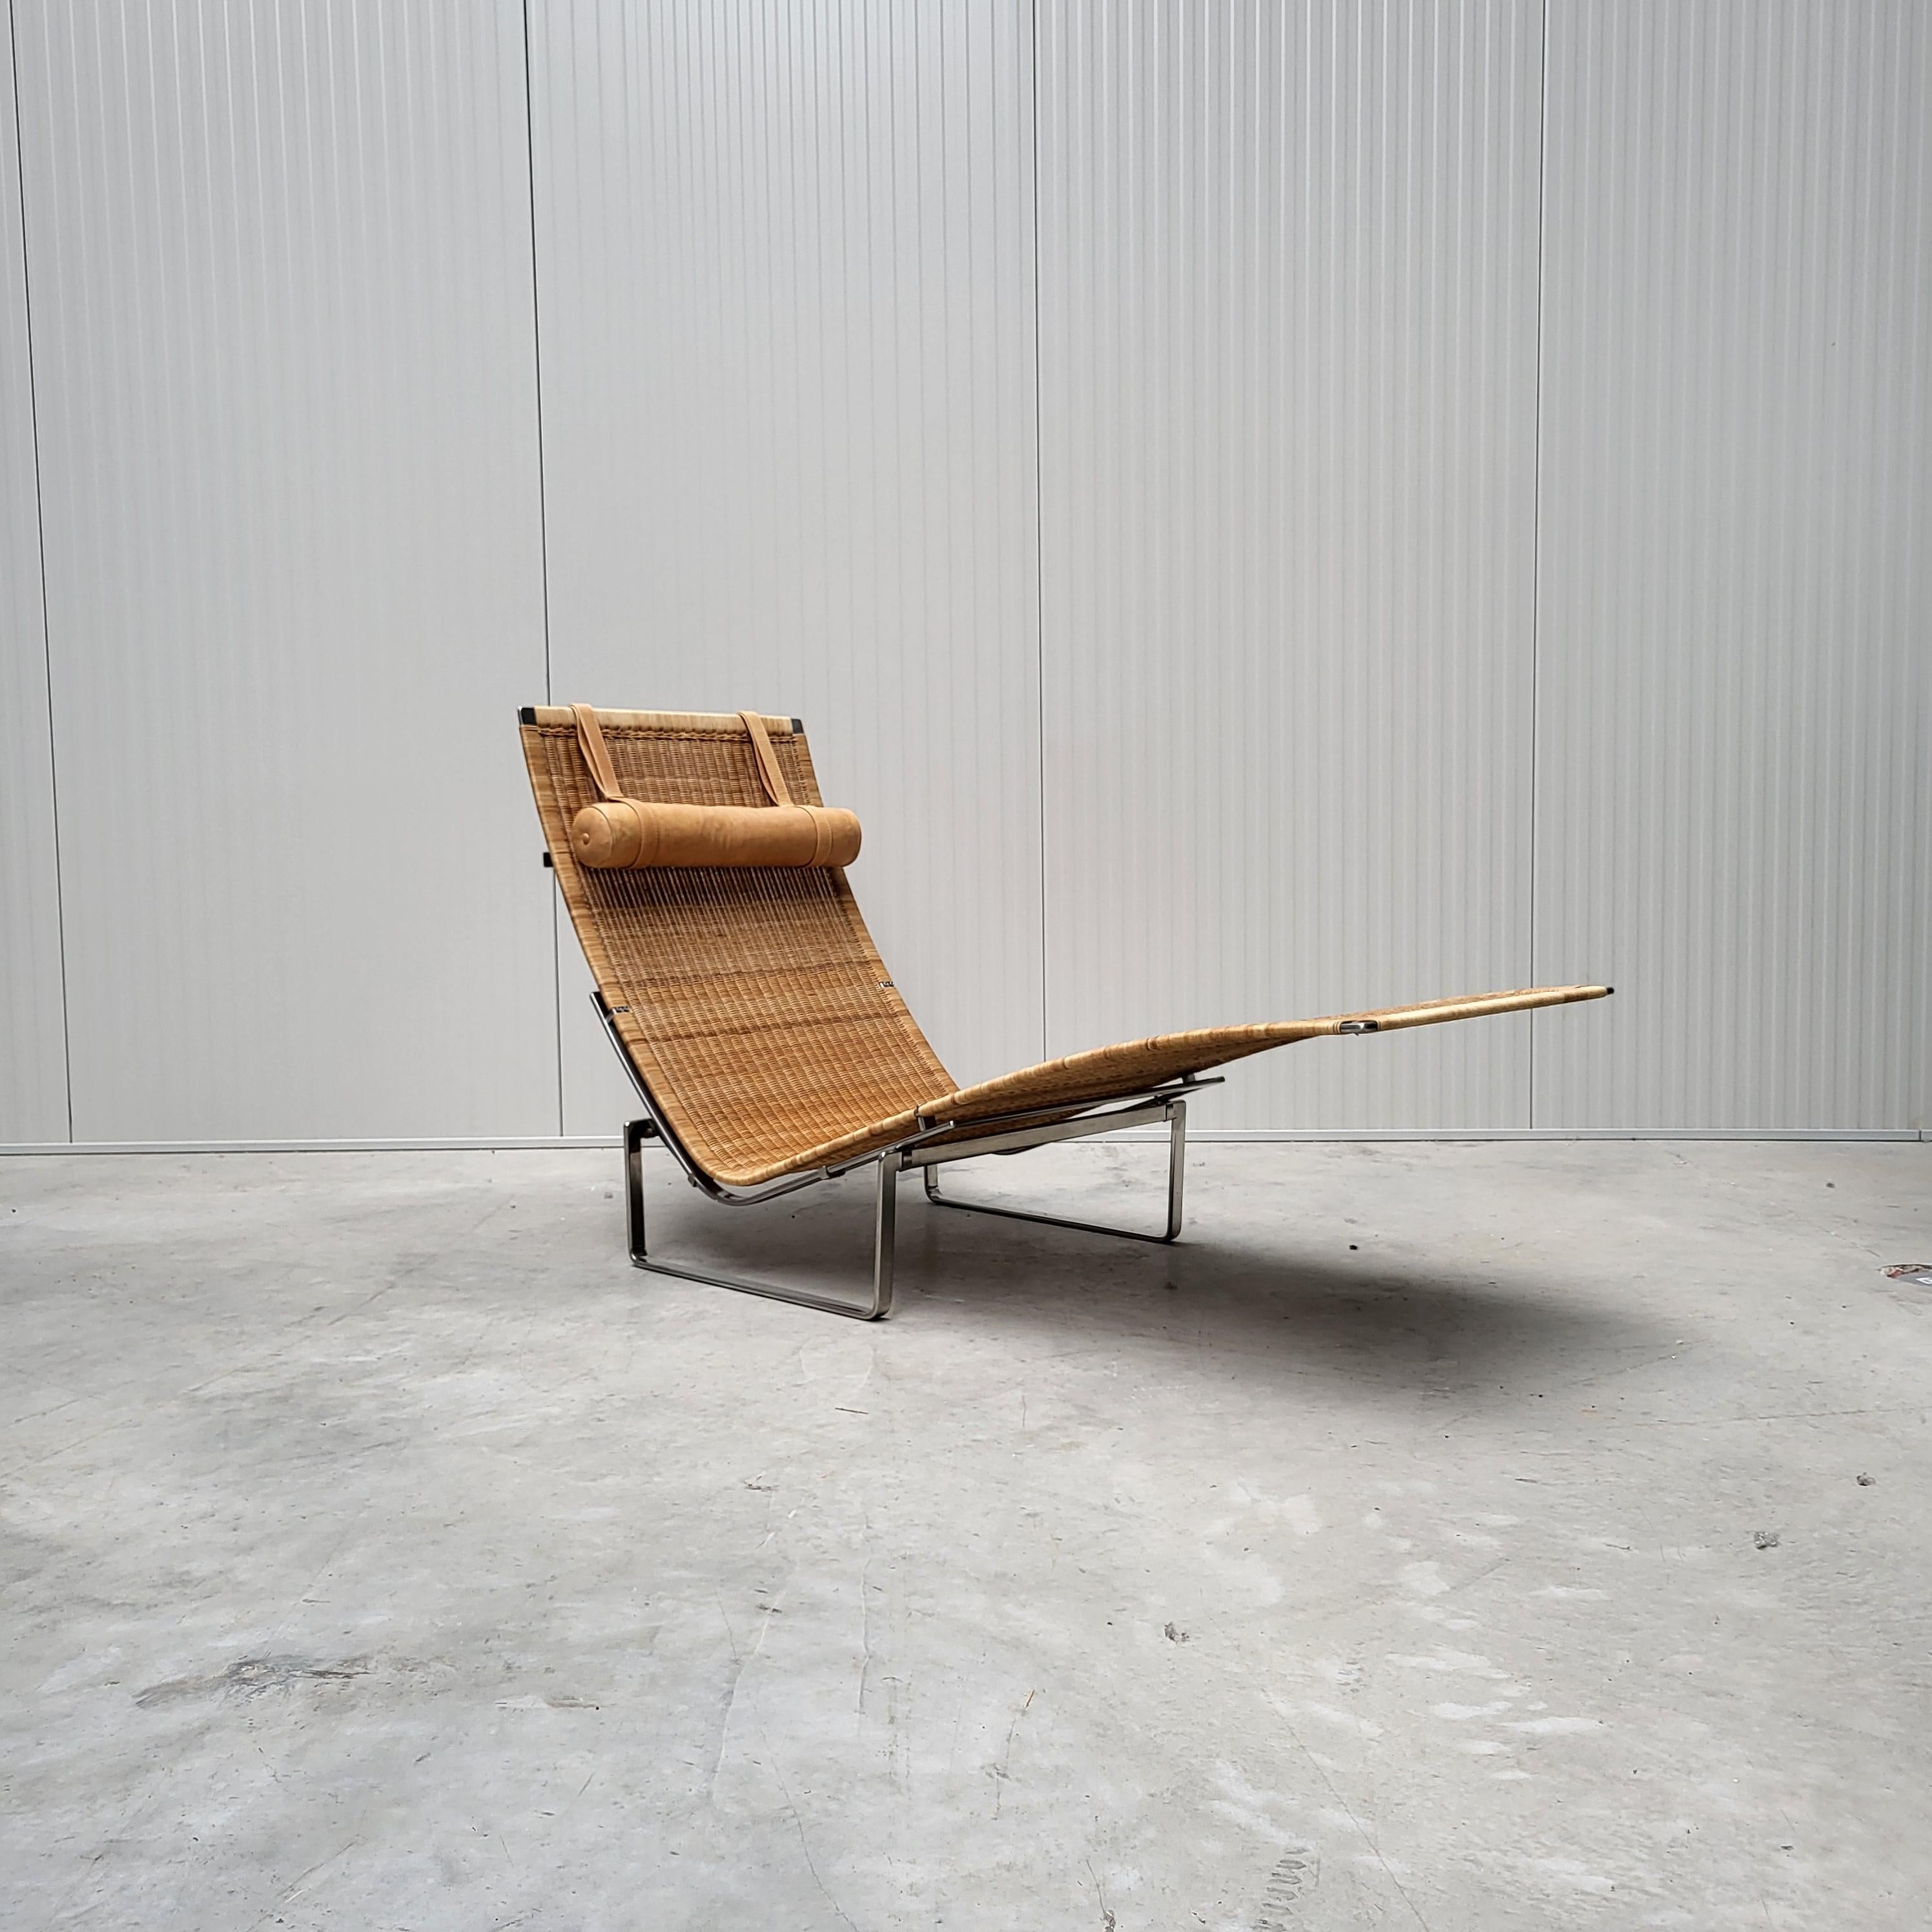 This wonderful example of the PK24 wicker chaise longue was designed by Poul Kjaerholm in the 1960s and was produced by Fritz Hansen in Denmark in 2001.

The chaise features a polished steel frame and a wicker covering, both of which are in an